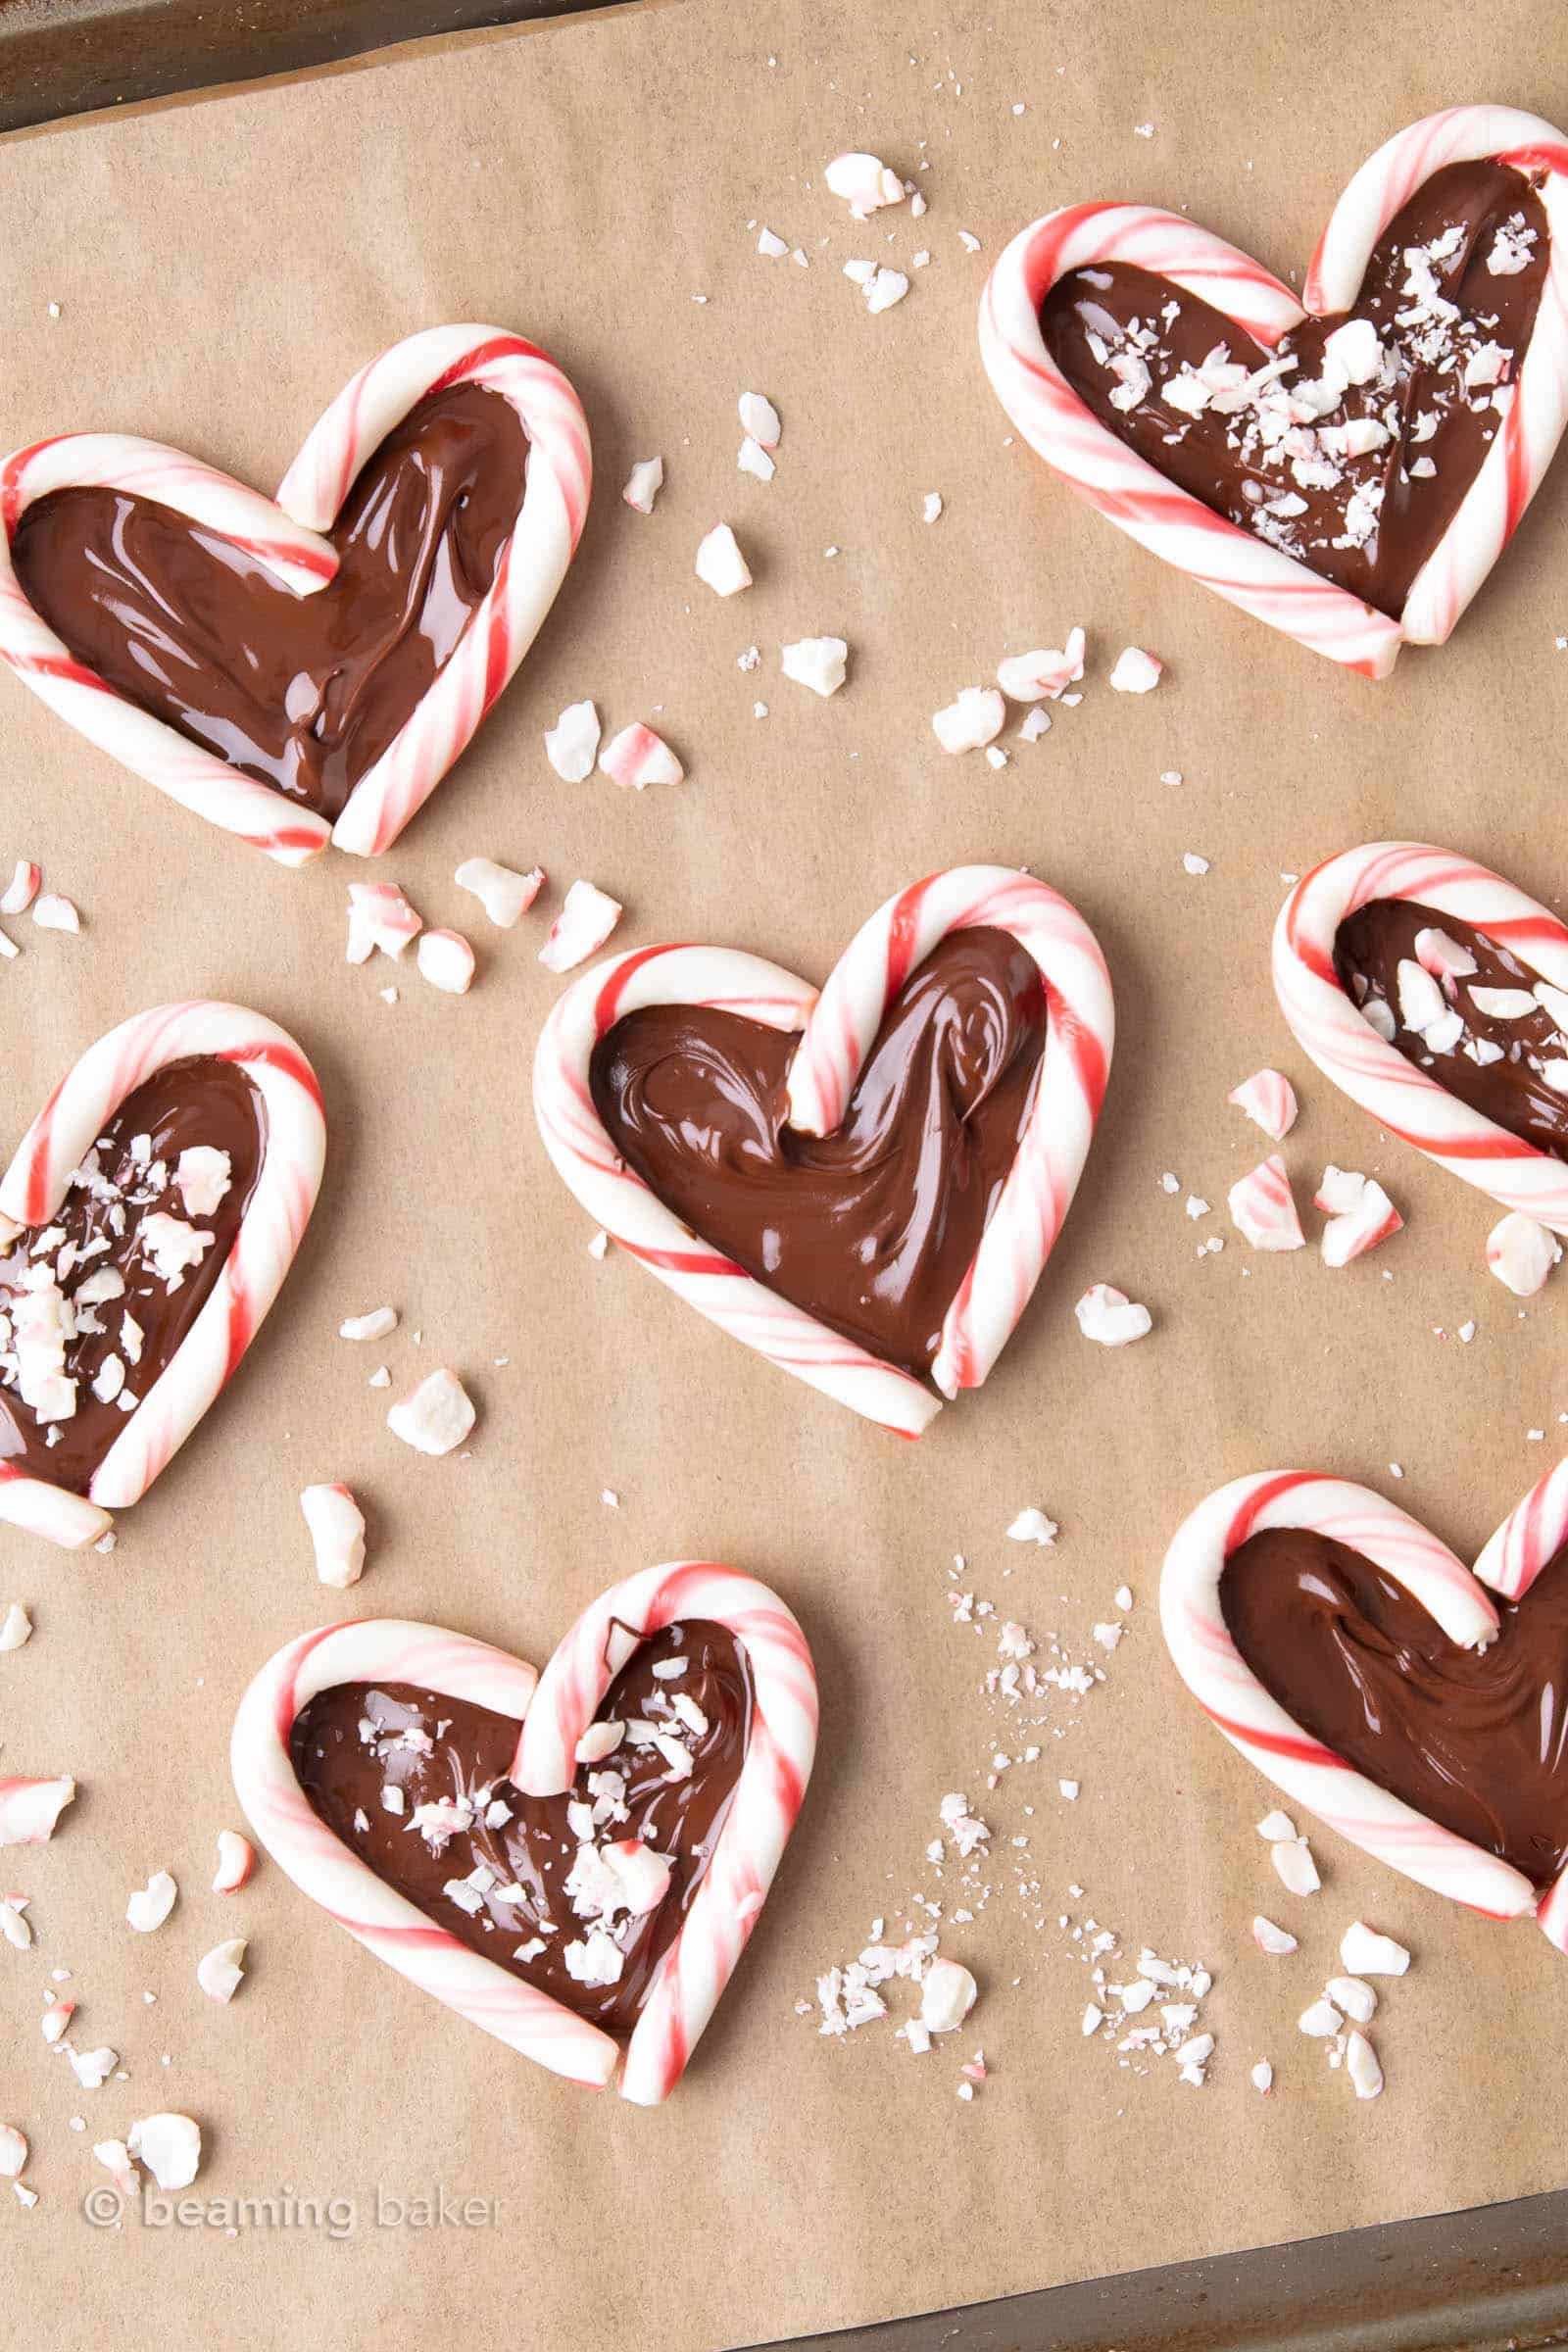 Candy cane hearts being assembled on parchment paper with crushed candy cane pieces scattered around